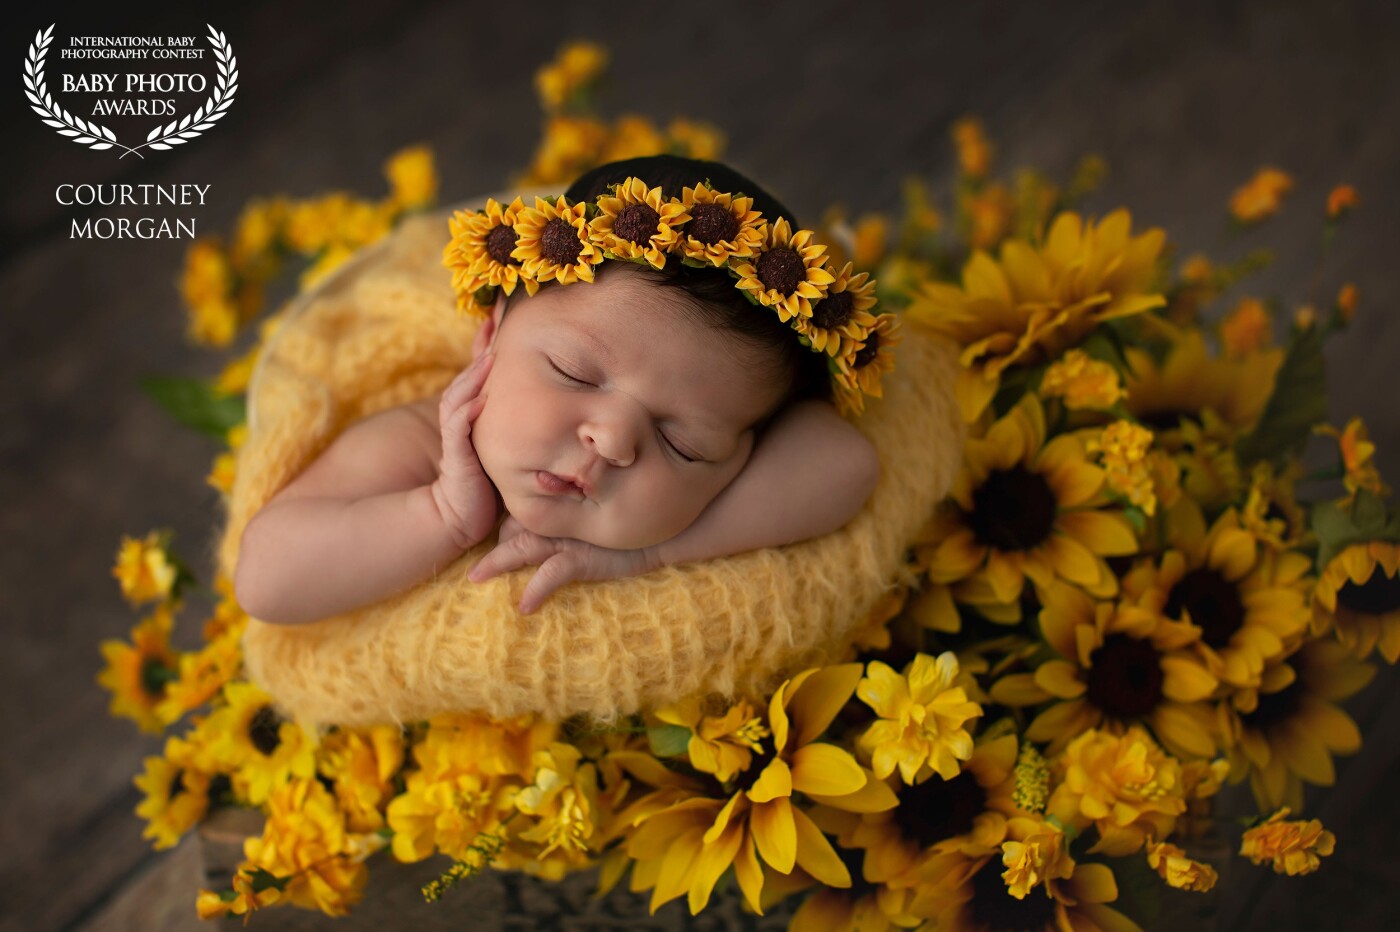 This baby's mama loves sunflowers, so we worked to create an image that was double-meaningful to her.  Sunflowers represent loyalty, strength, and adoration.  They can grow just about anywhere they are planted.  What a great way to show your baby how strong and powerful they are, as well as how much you adore them.